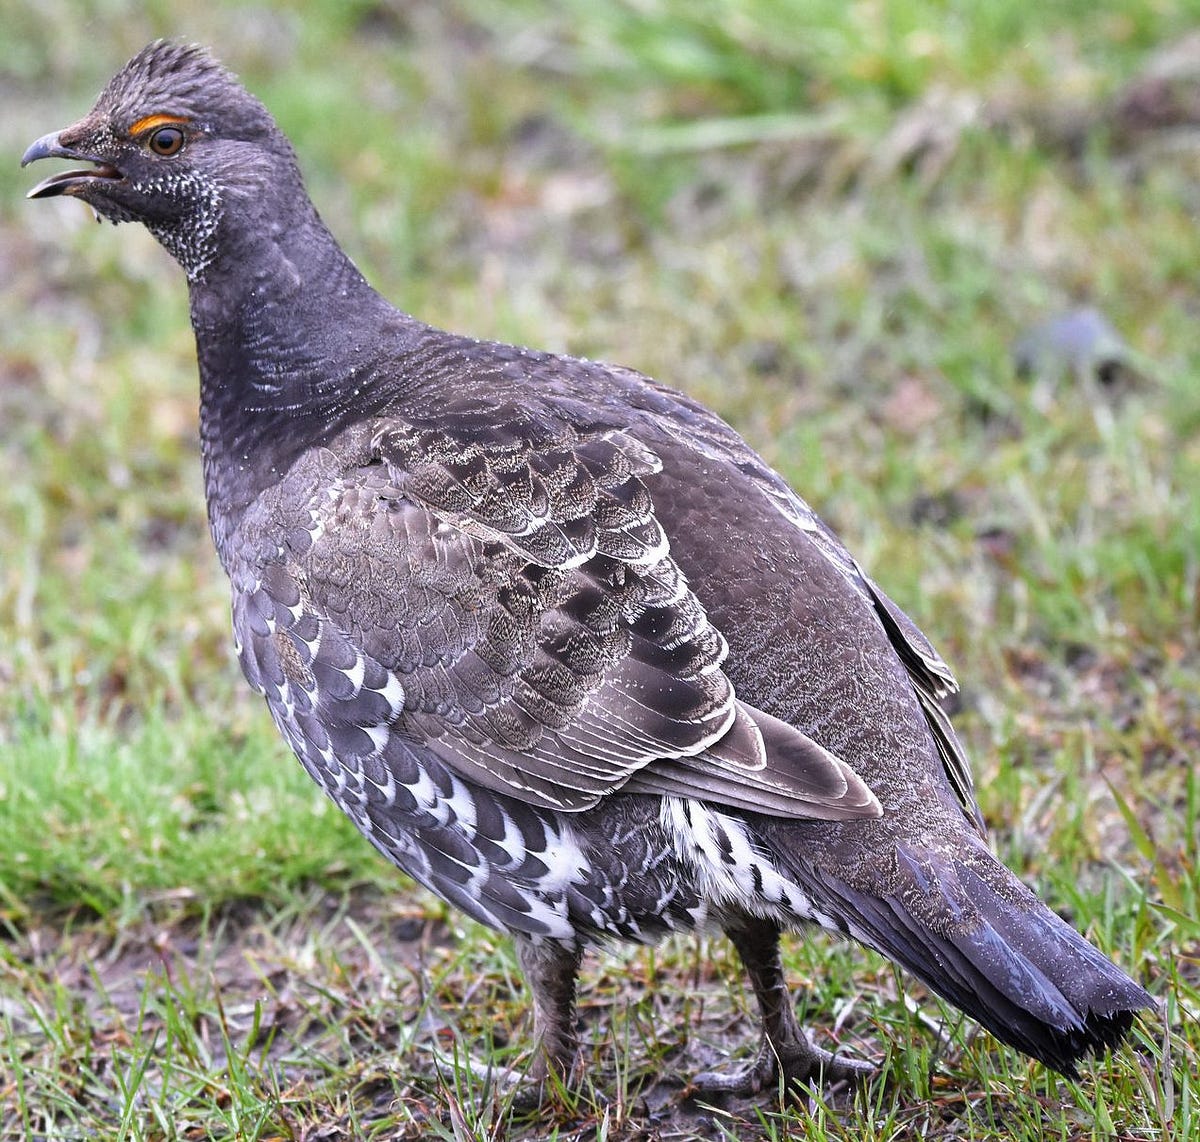 Blue Grouse on the ground